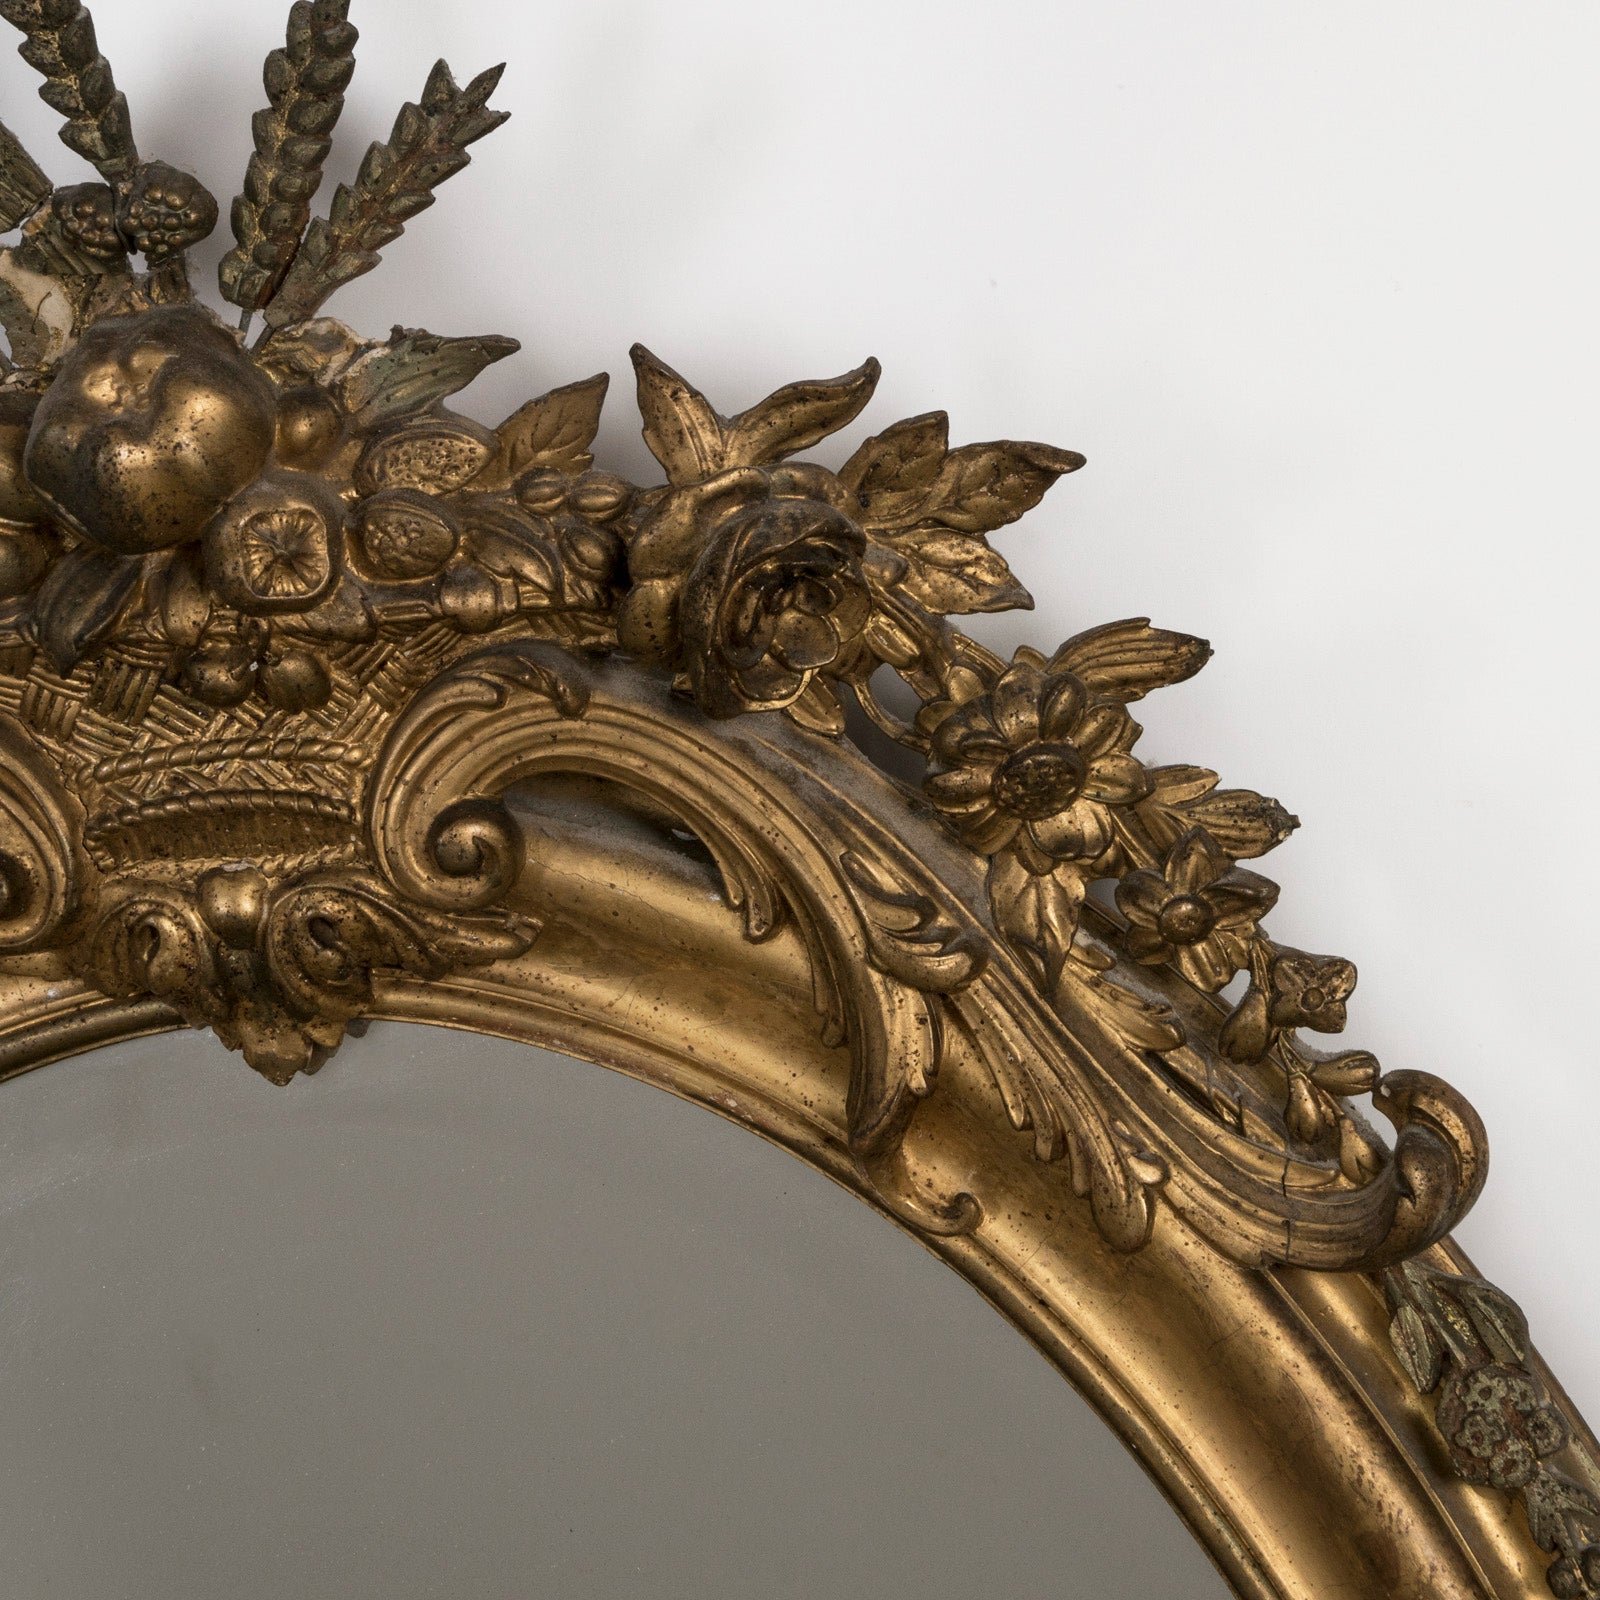 19th C French Oval Gold Leaf Mirror with Crest 